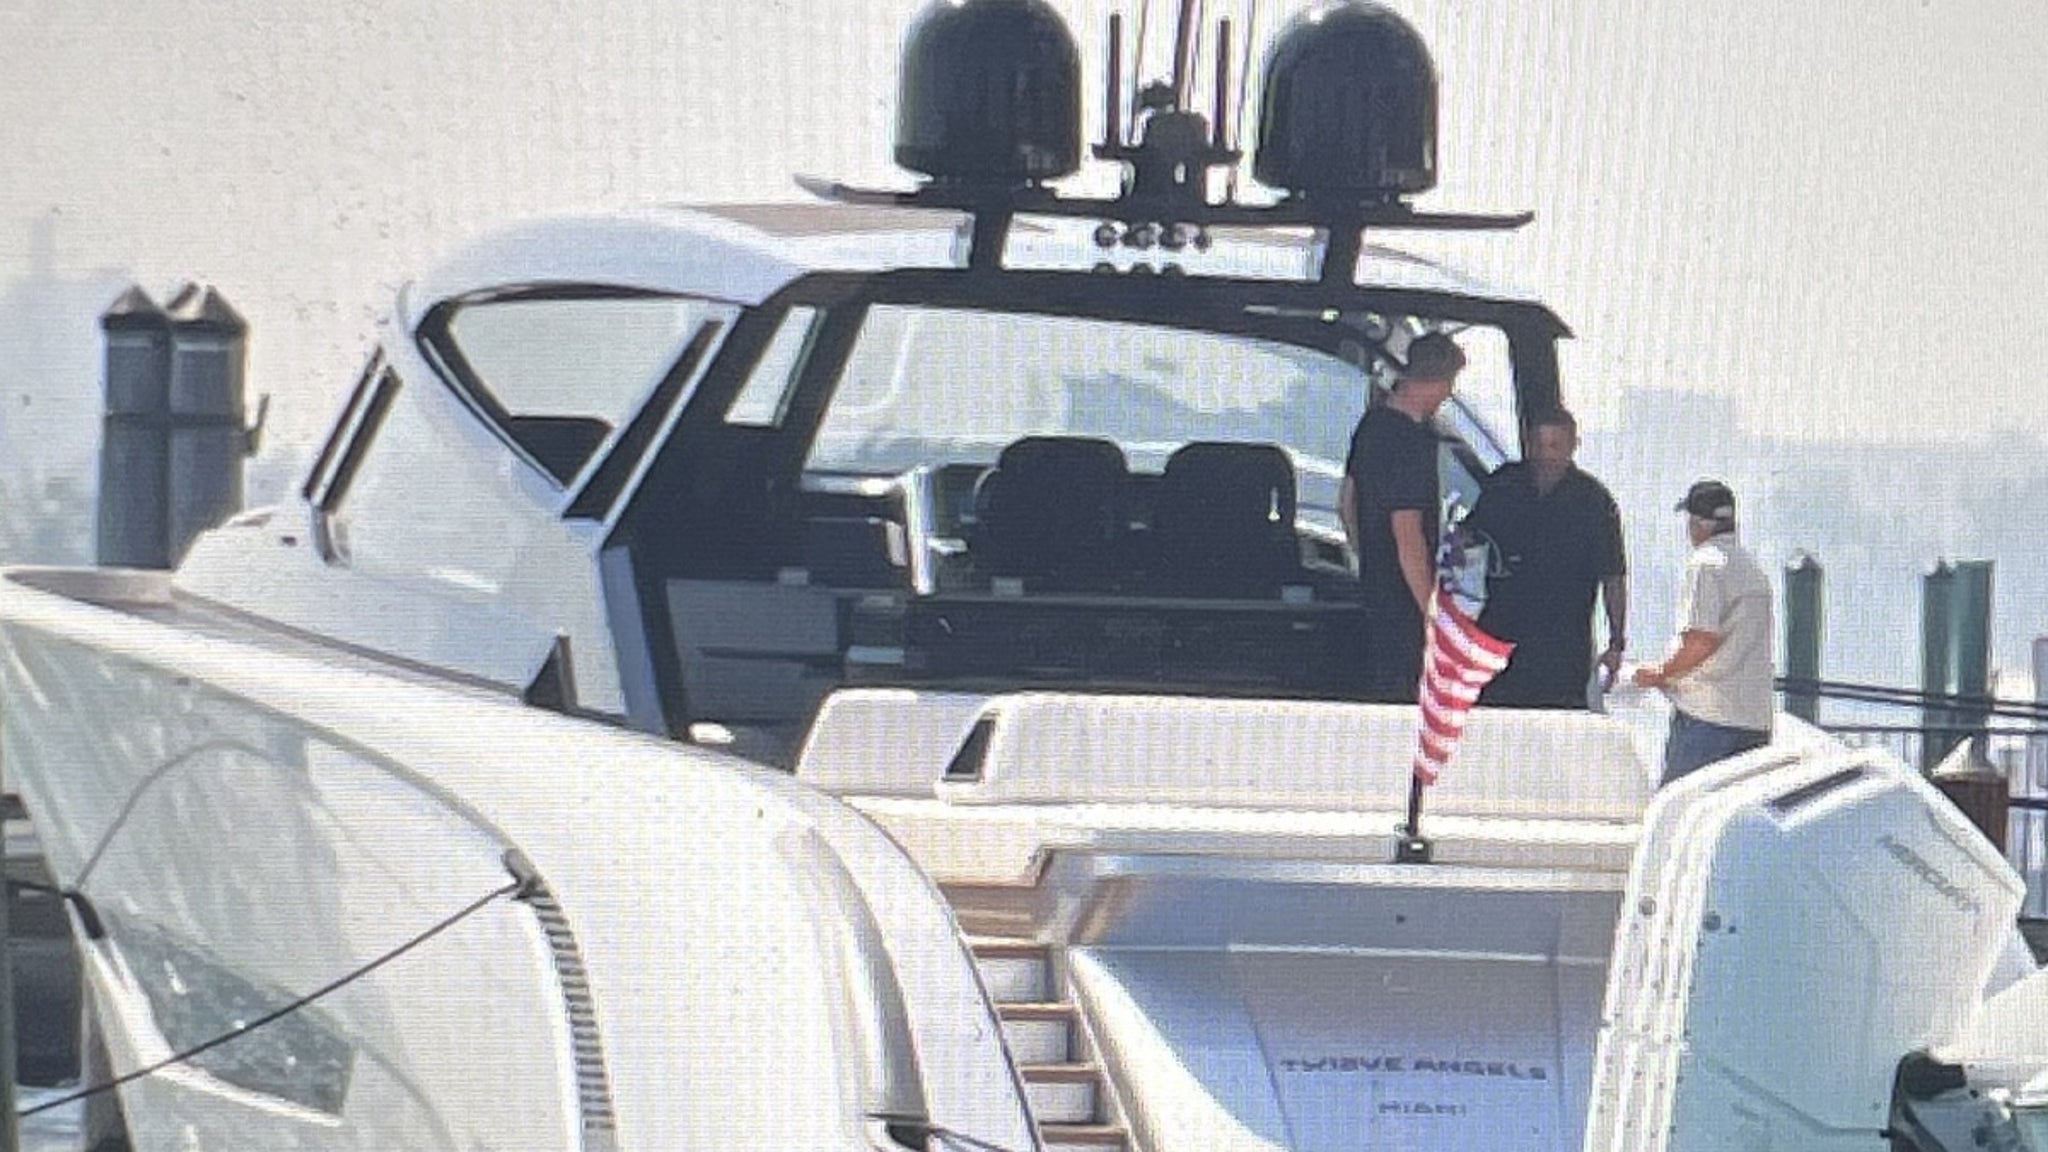 Tom Brady Hangs Out On New 'Tw12ve Angels' Yacht In Florida thumbnail